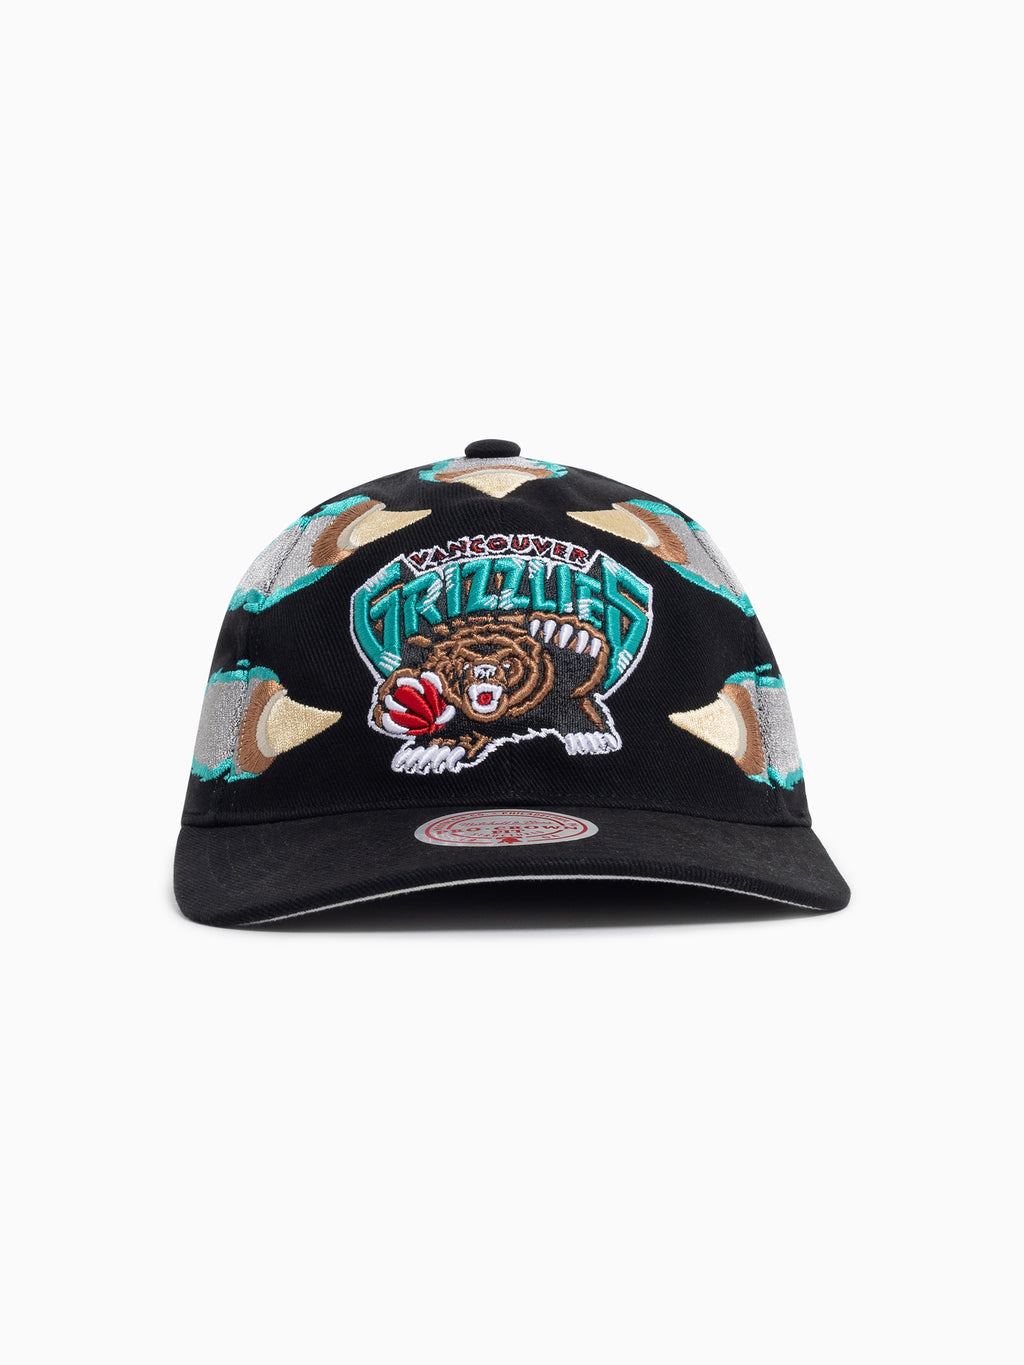 Men's Vancouver Grizzlies Mitchell & Ness Turquoise/Black Hardwood Classics  Team Side Fitted Hat